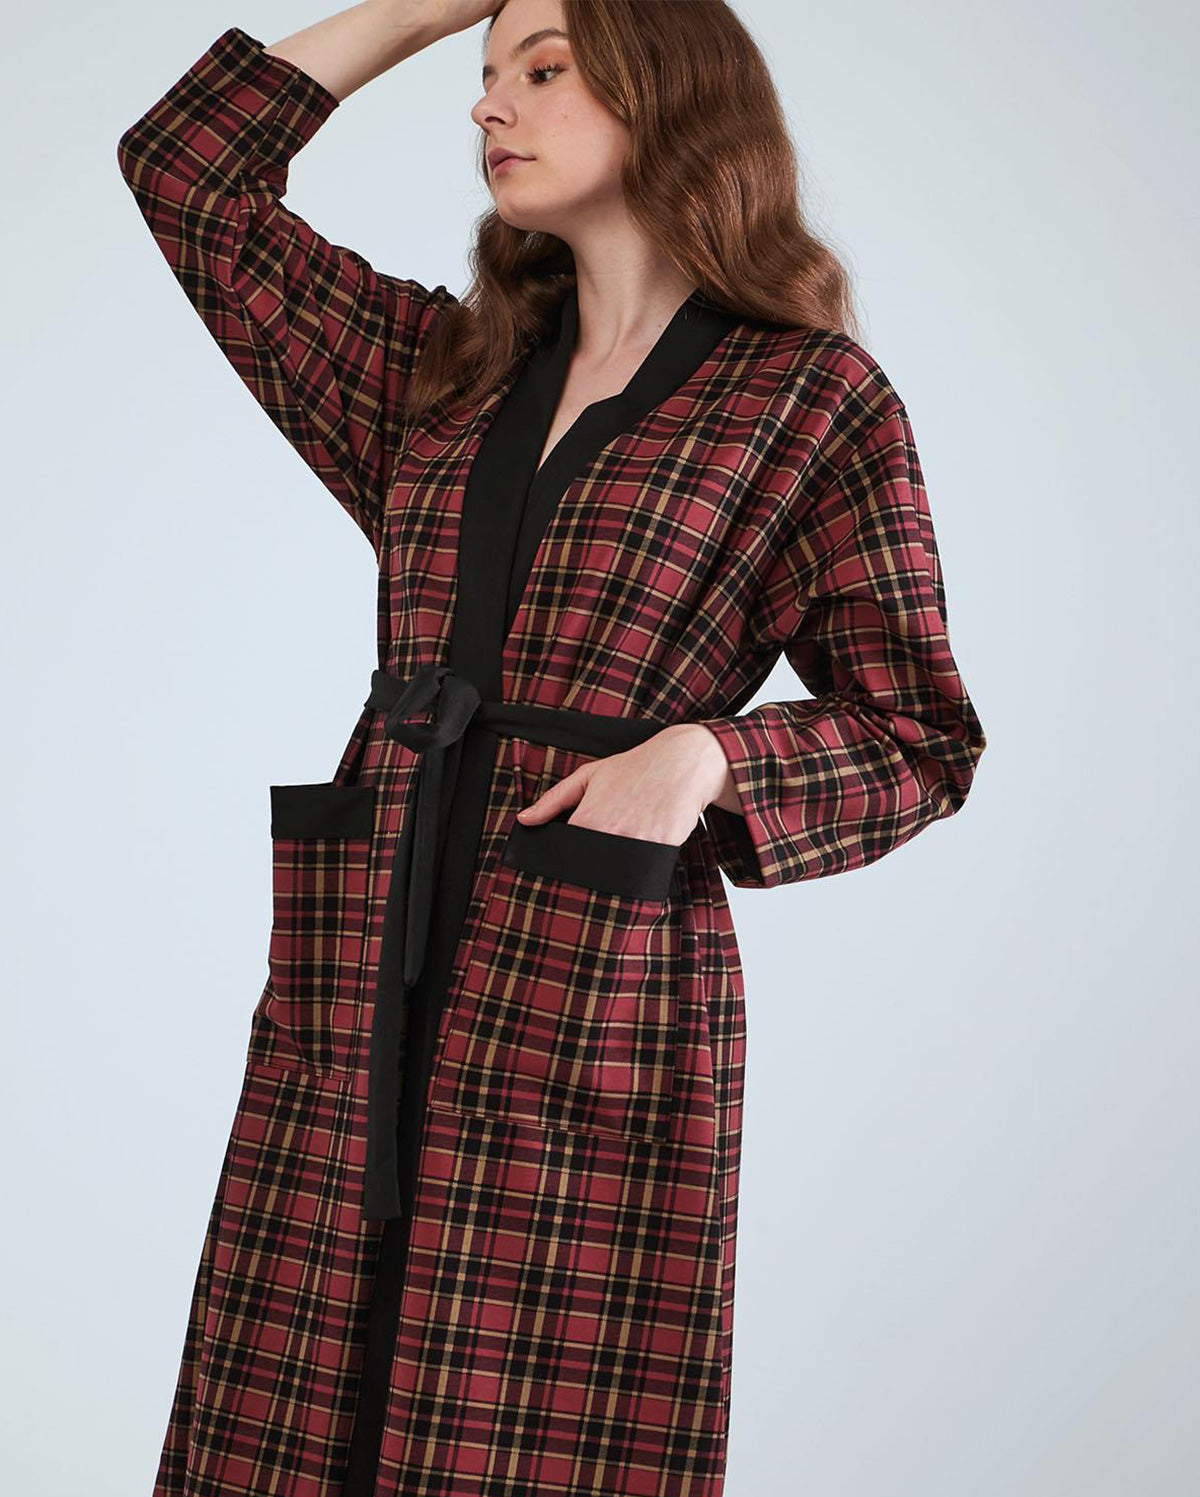 Printed Dressing Gown - Burgundy Check